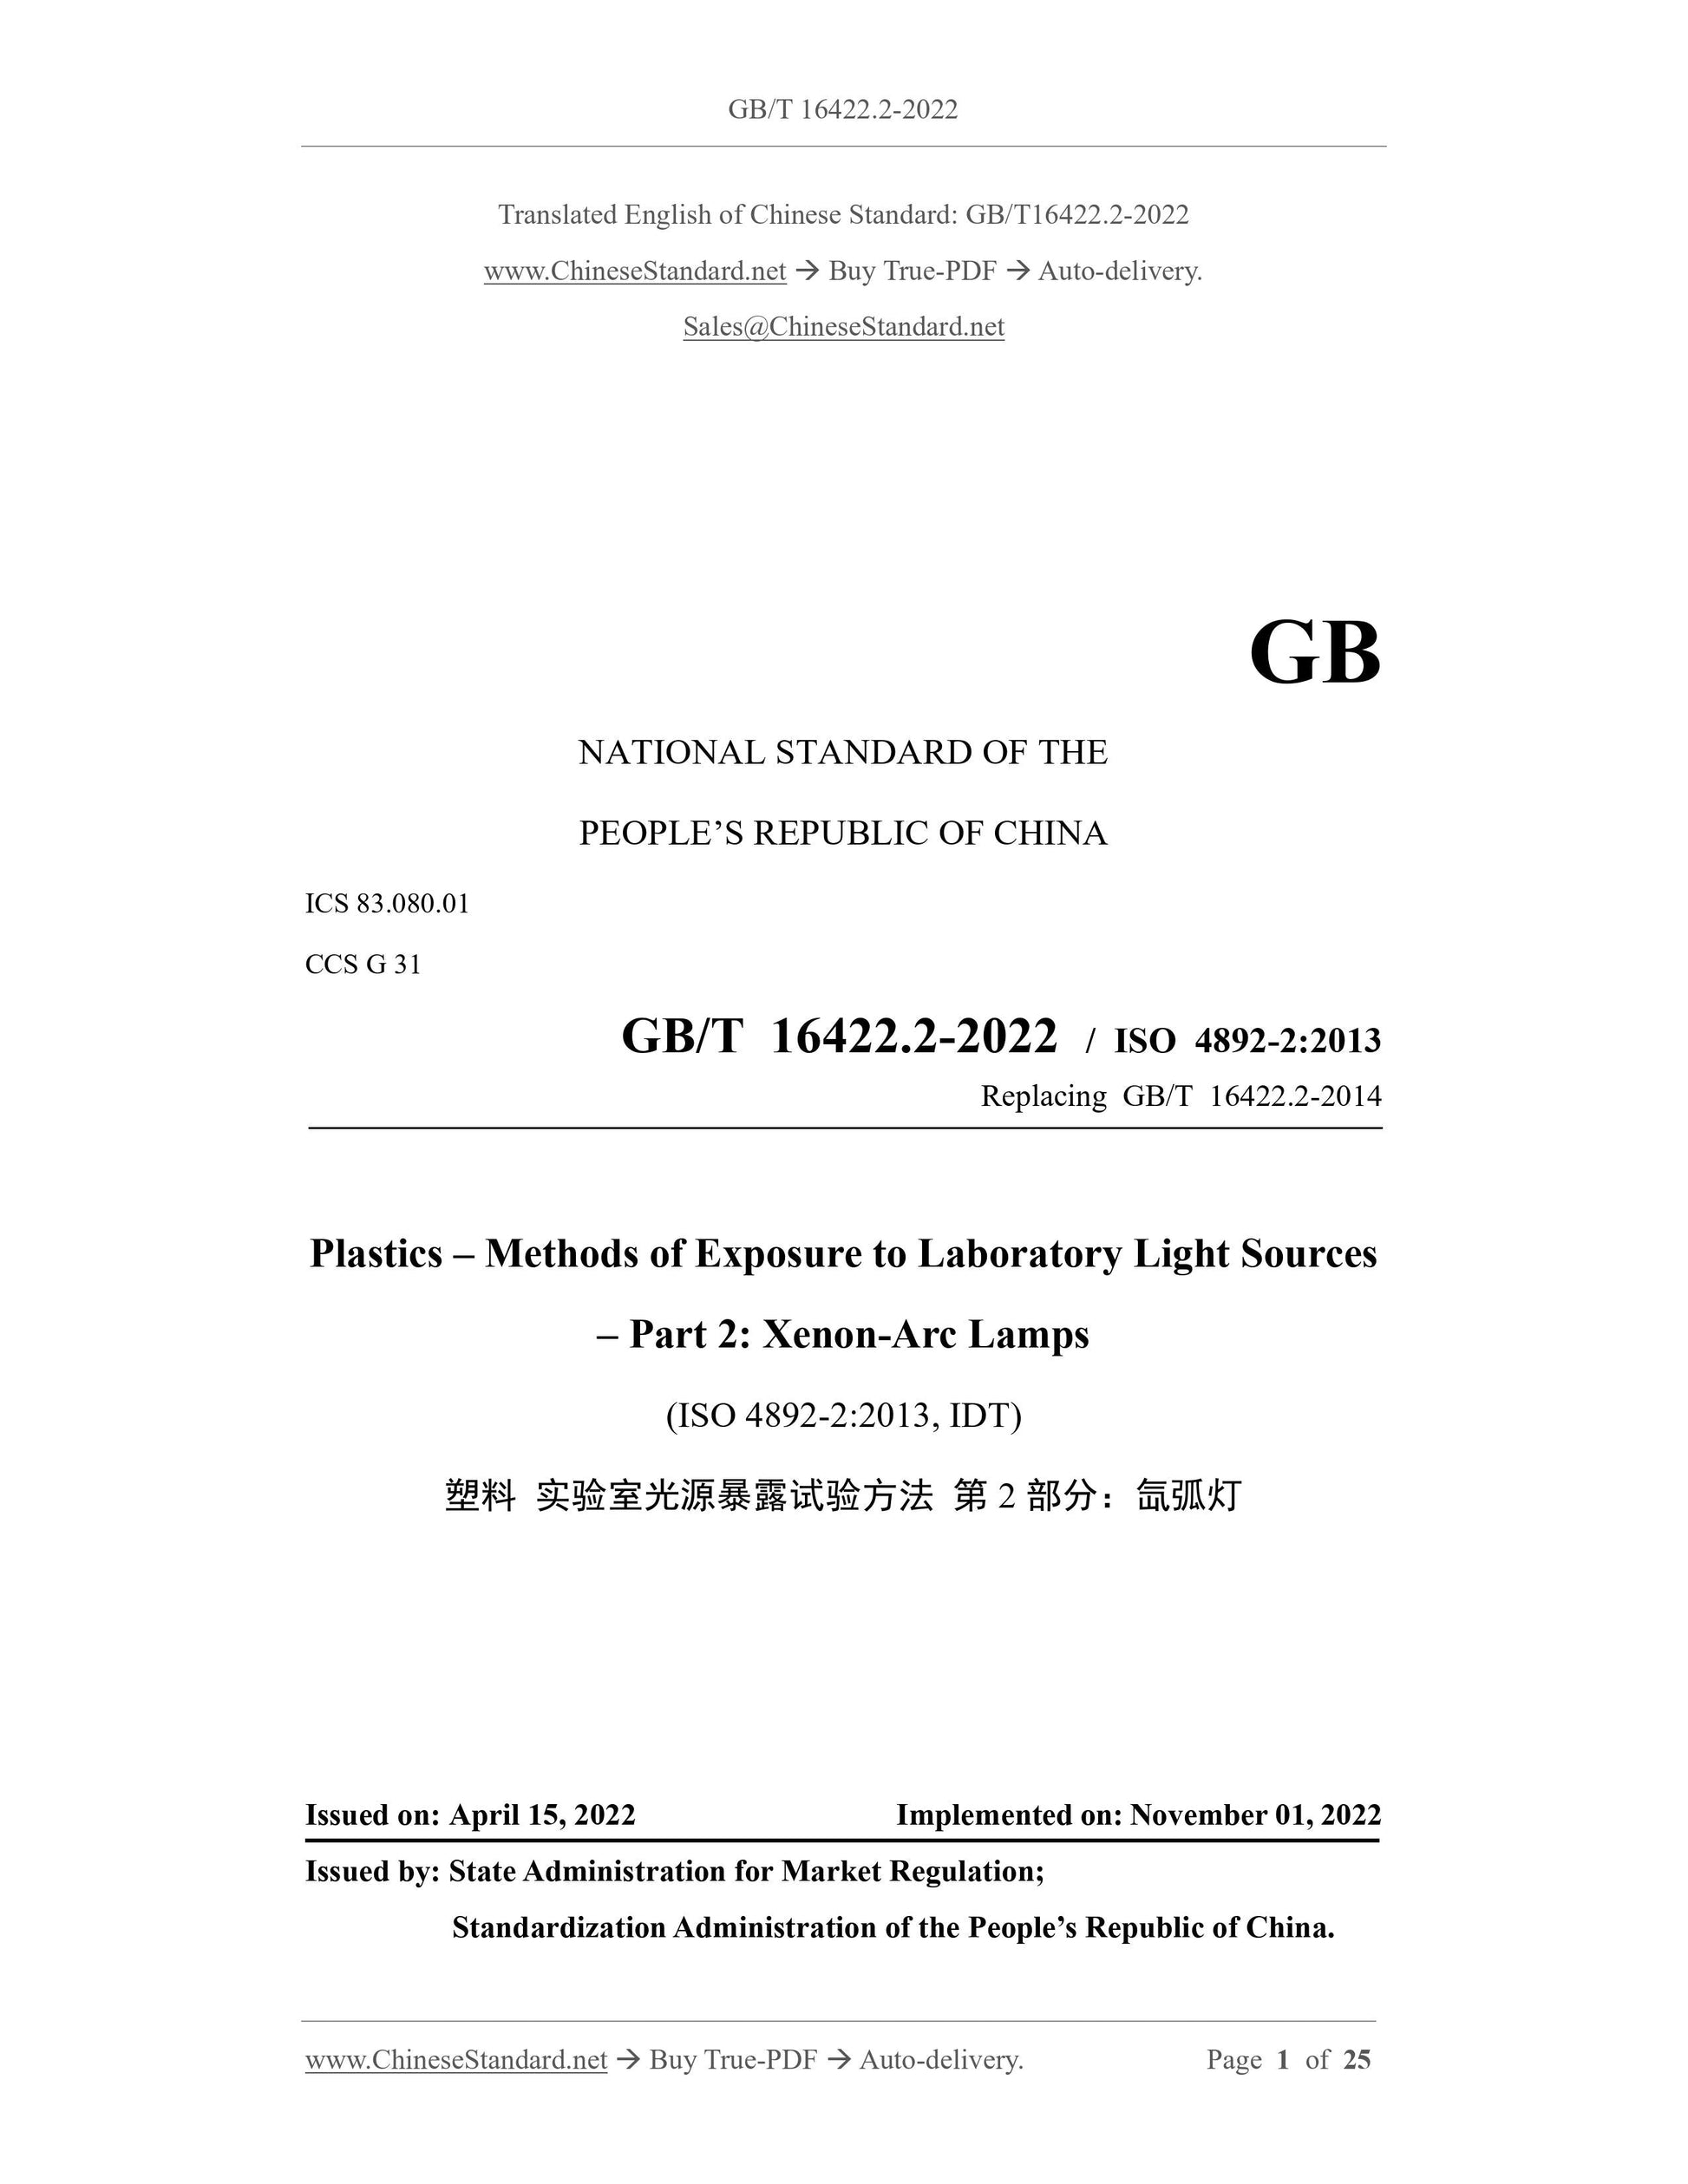 GB/T 16422.2-2022 Page 1